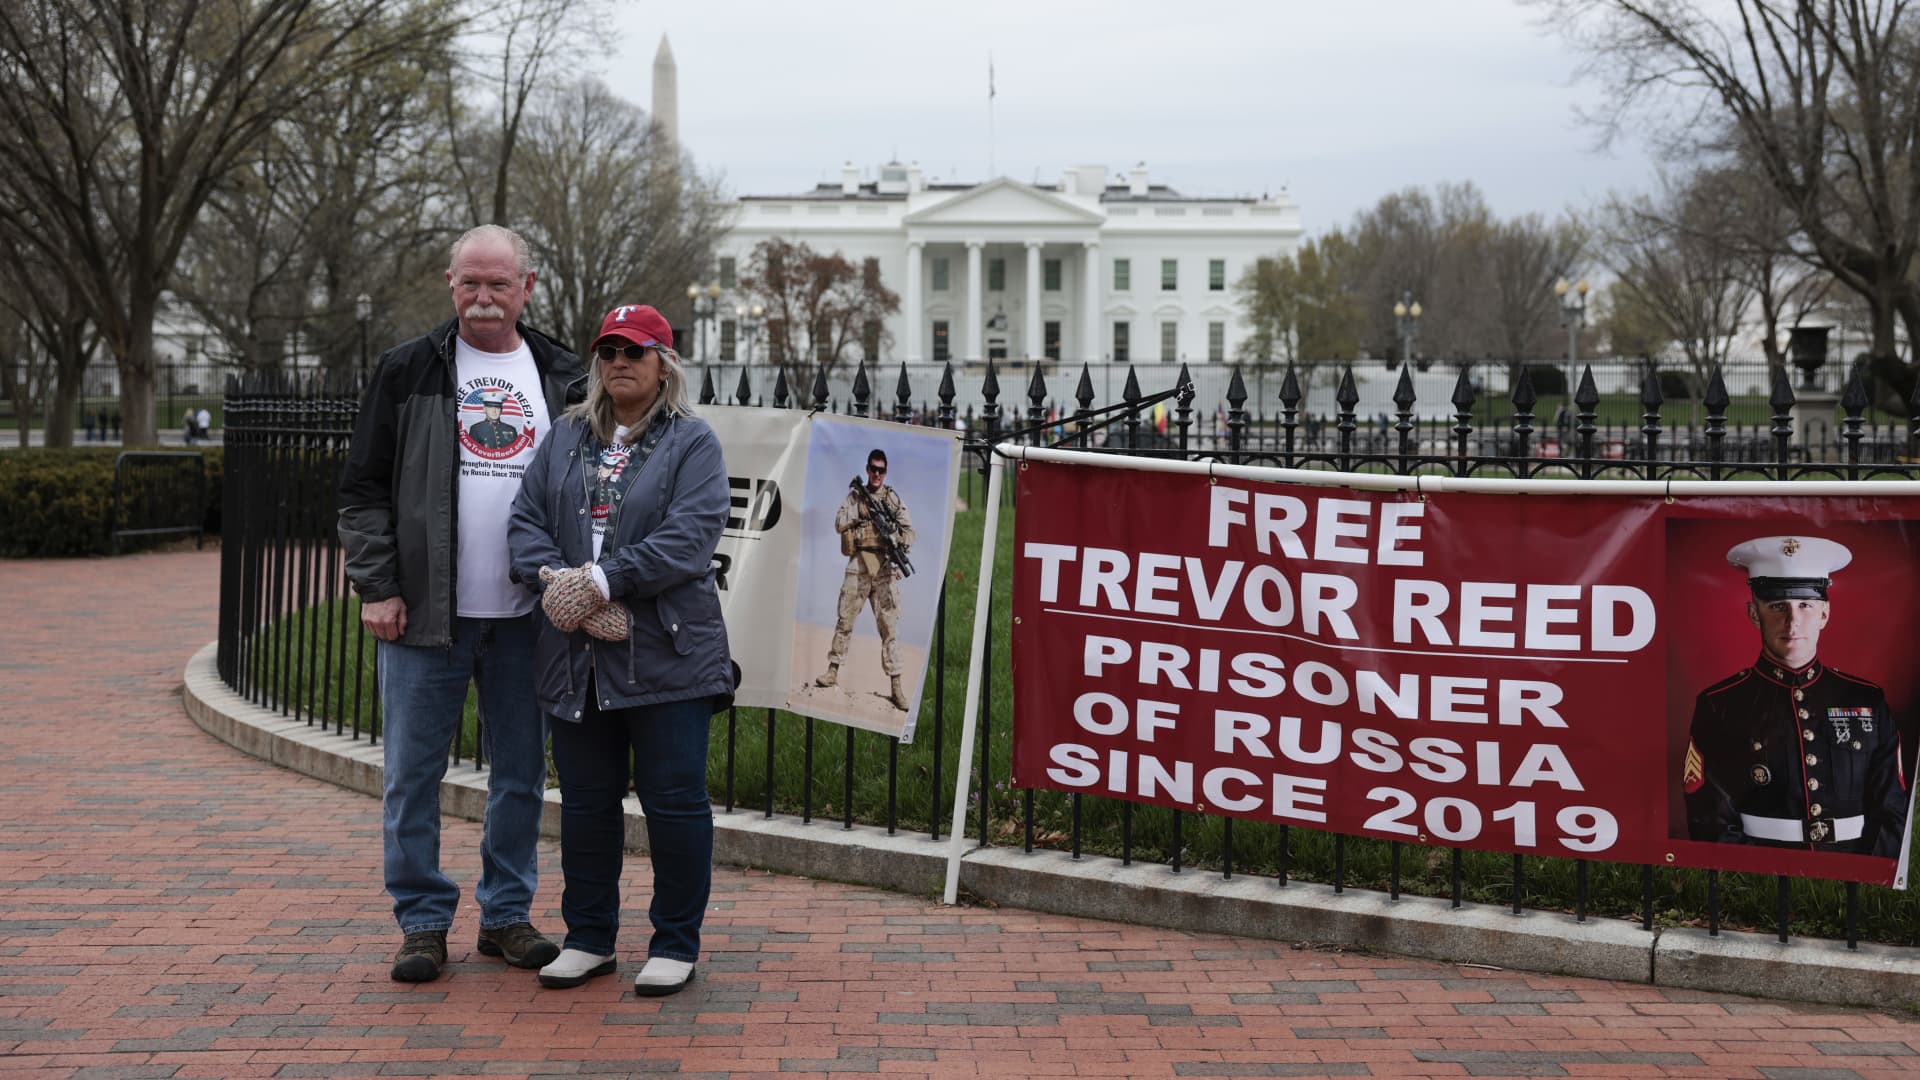 Joey Reed and Paula Reed, the parents of Trevor Reed, a U.S. Marine who is currently being detained in a Russian prison, demonstrate in Lafayette Park near the White House on March 30, 2022 in Washington, DC.